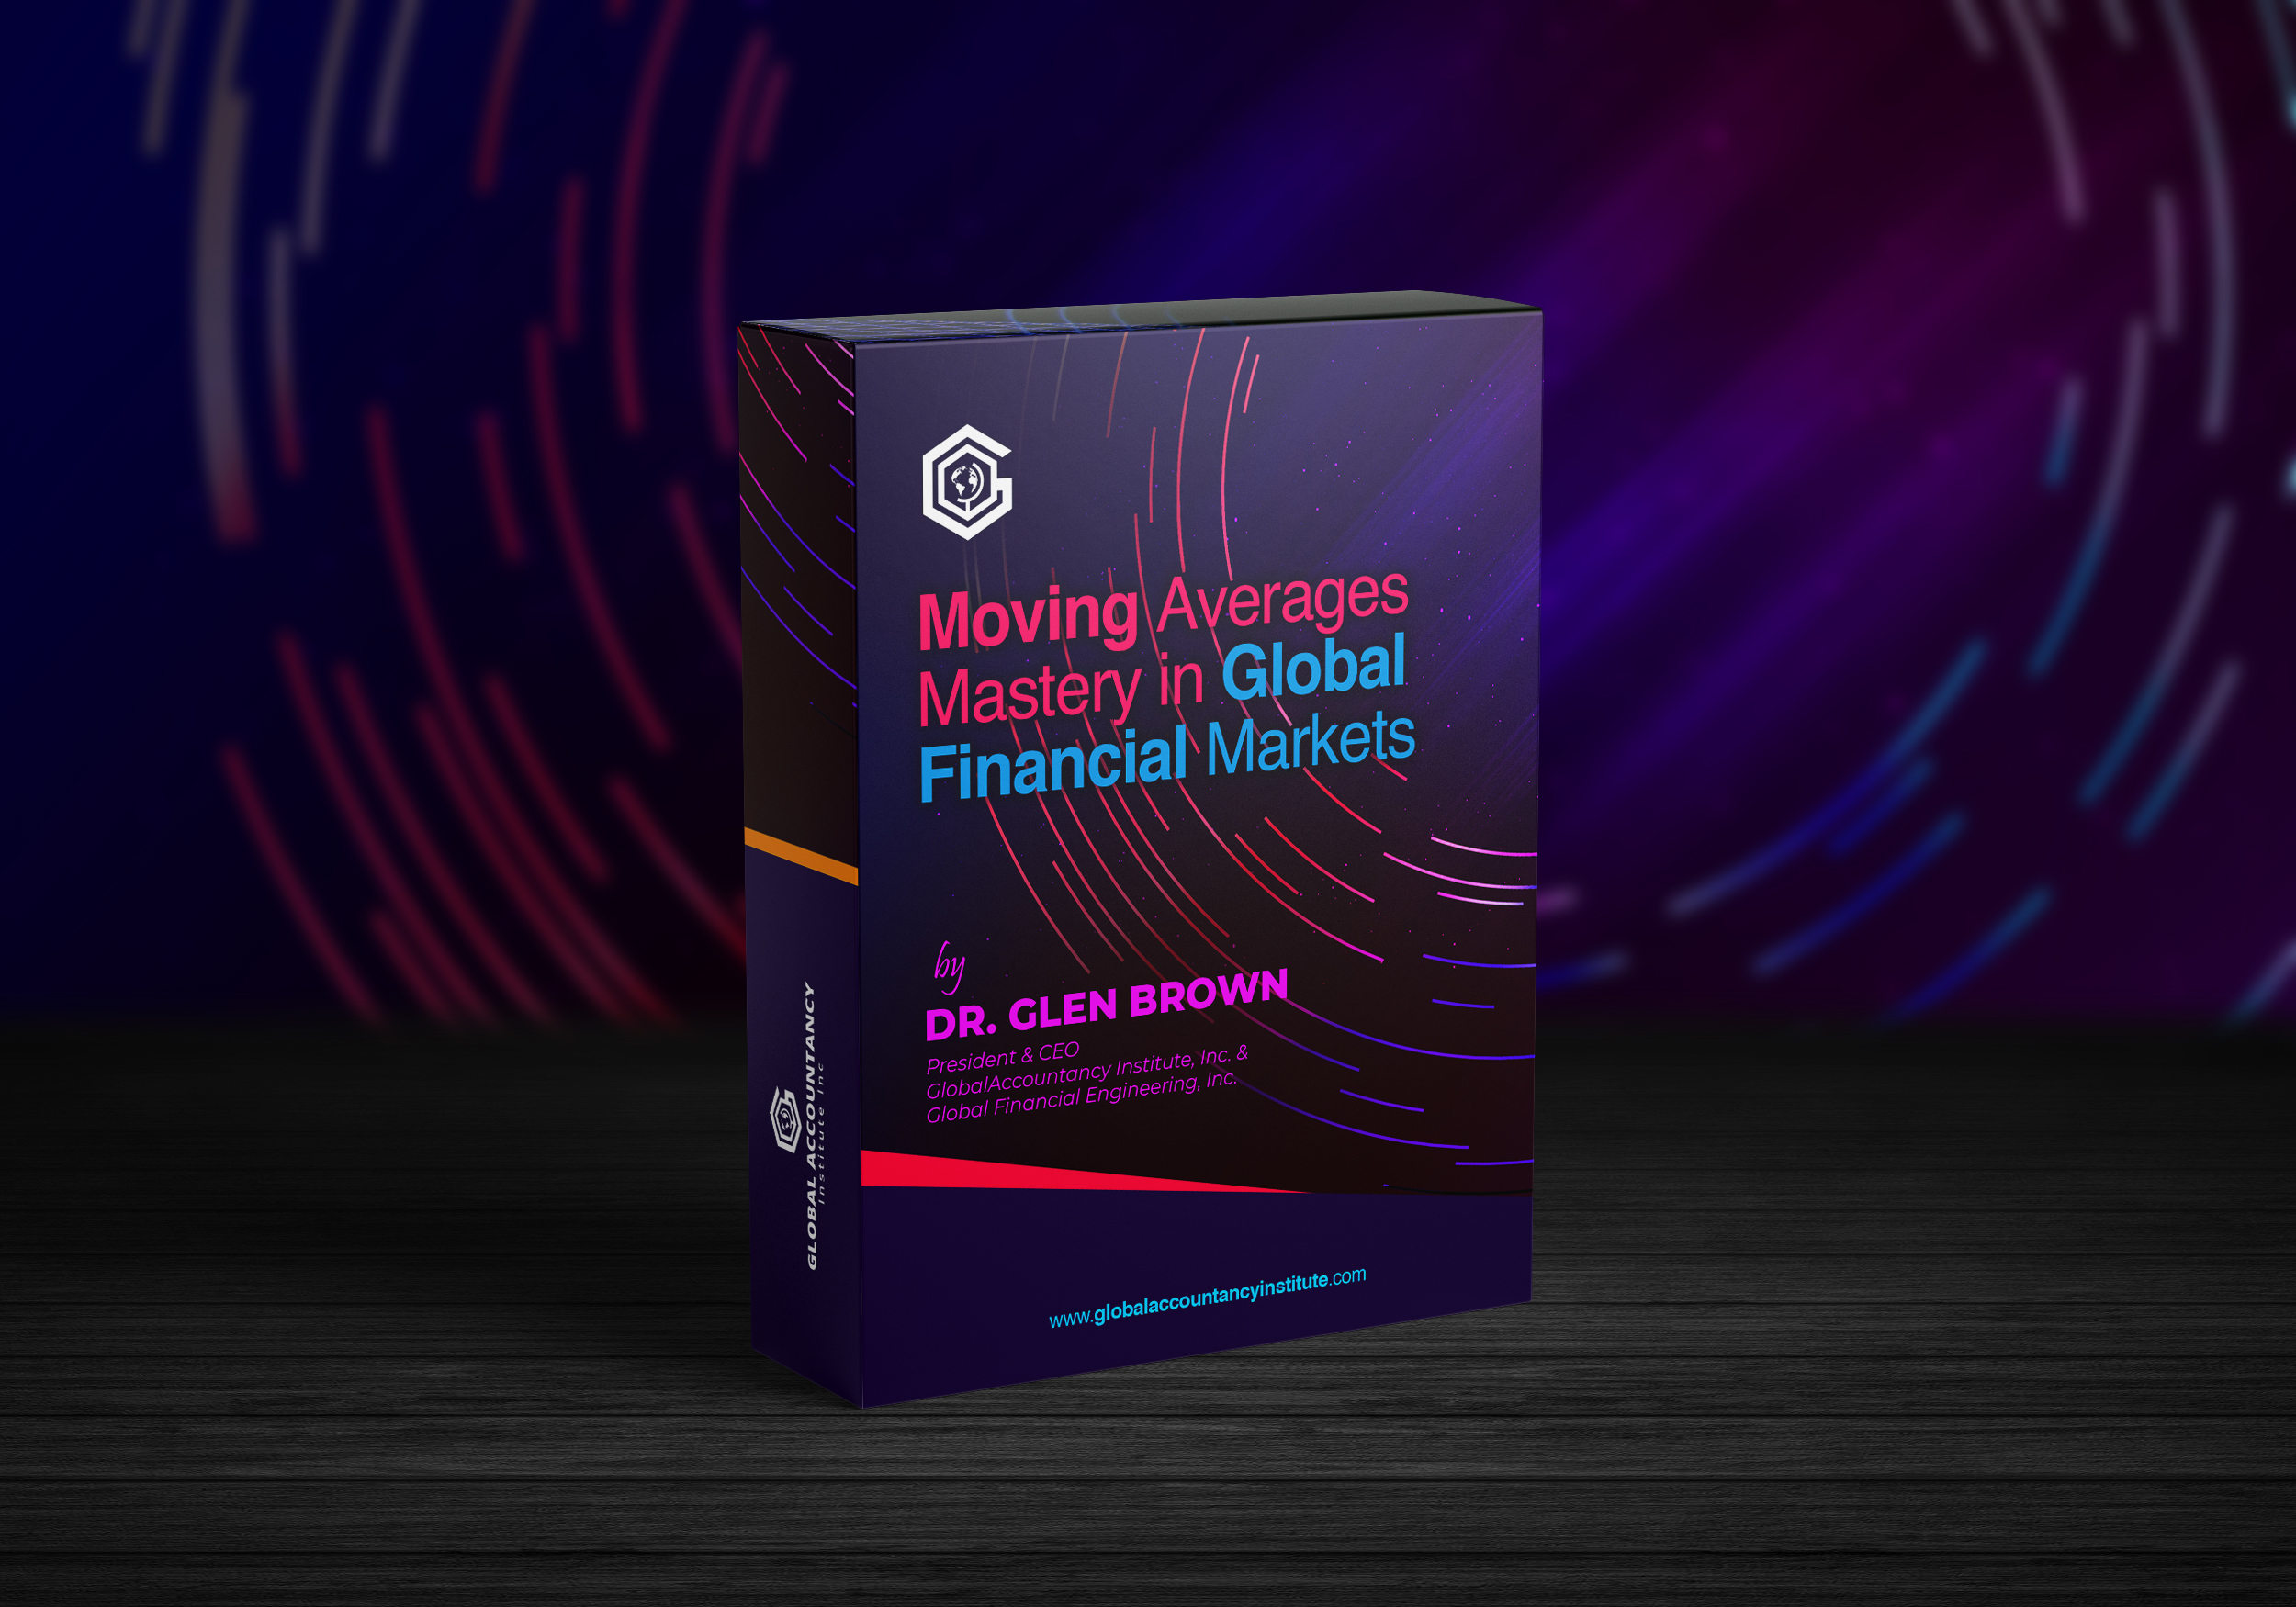 Moving Averages Mastery in Global Financial Markets by Dr. Glen Brown